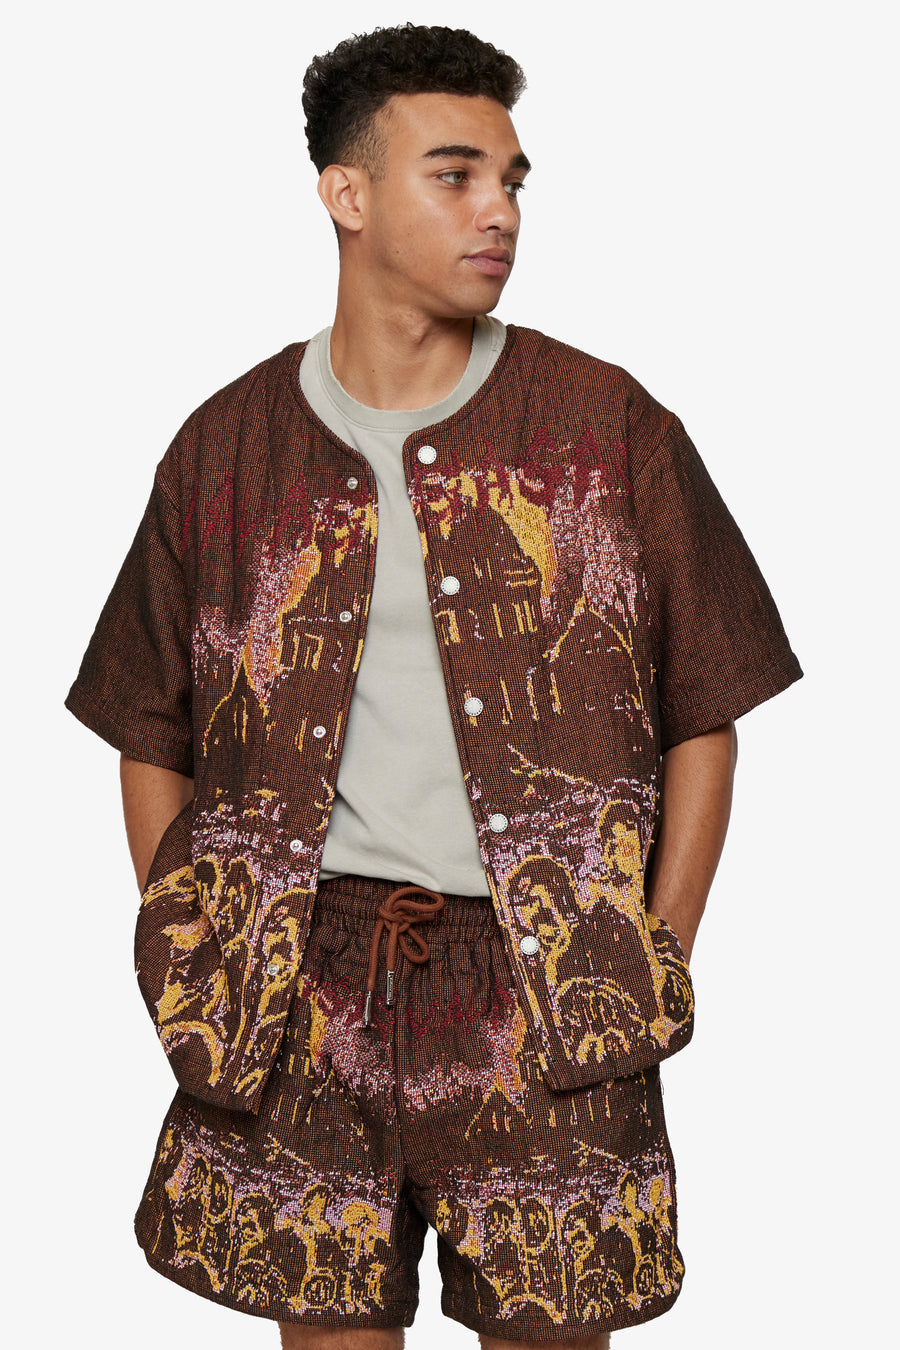 VALABASAS TAPESTRY BUTTON UP "GHOST HAND" BROWN